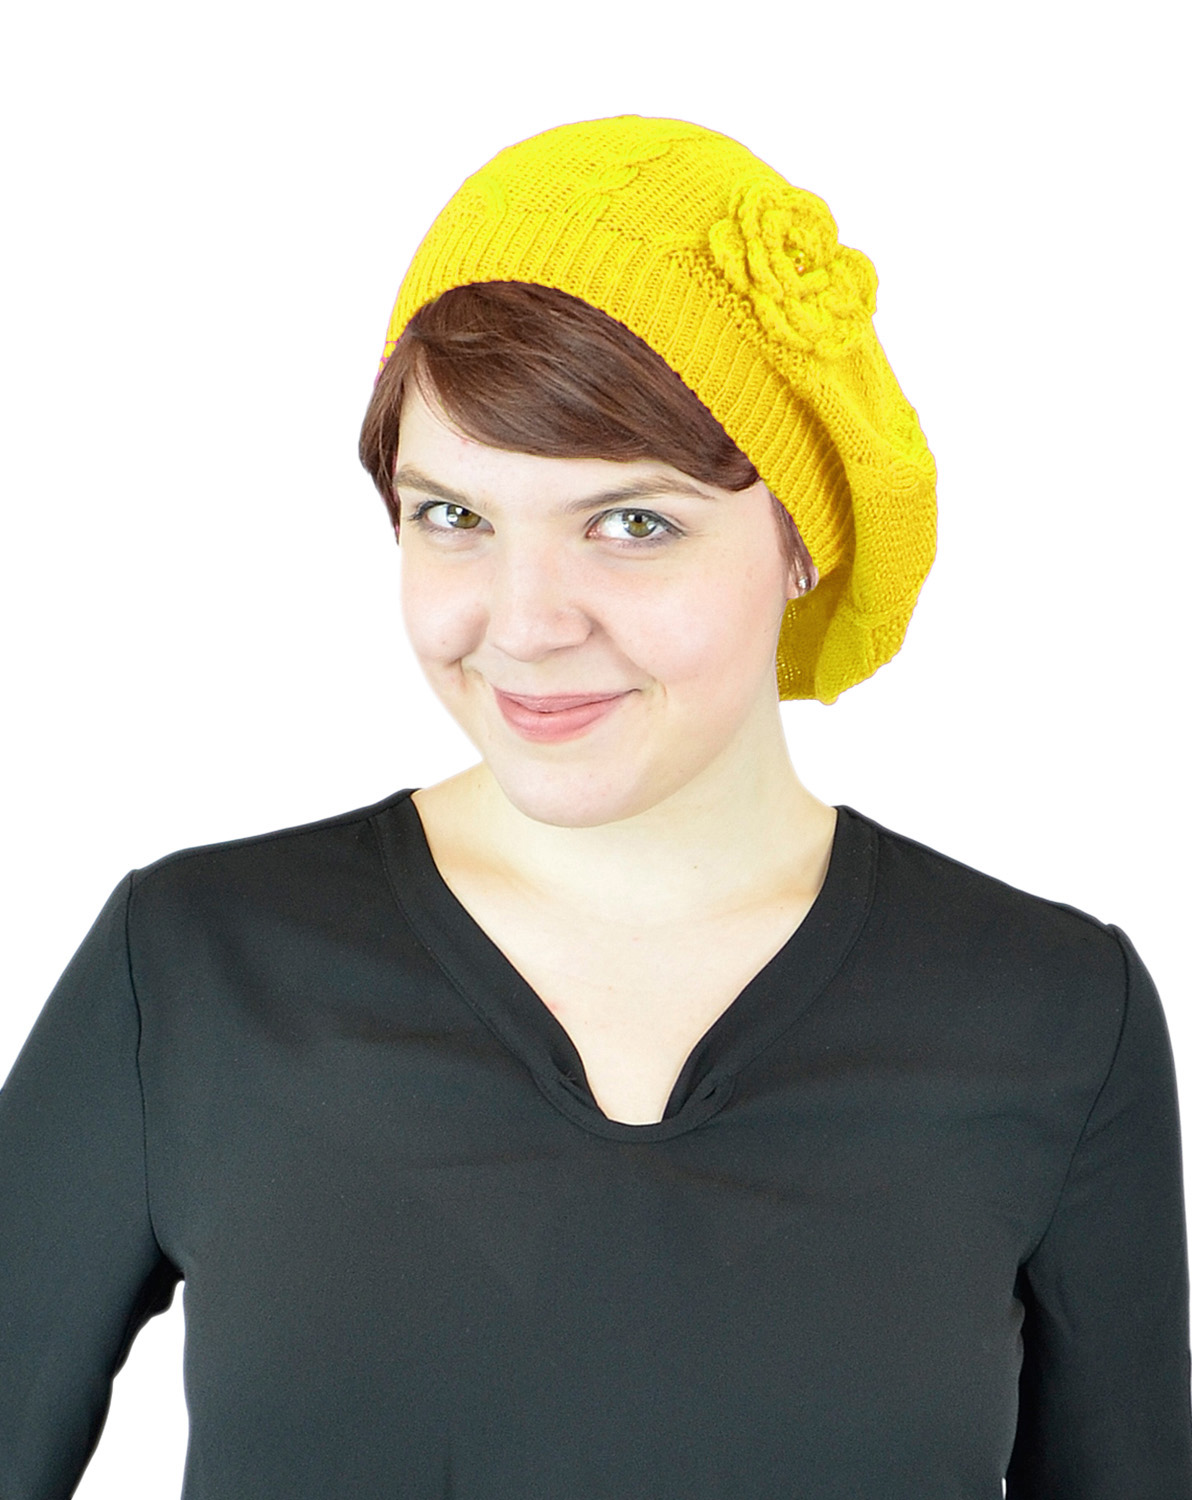 Belle Donne - Women's Mesh Crocheted Accented Stretch Beret Hat- Yellow 4082